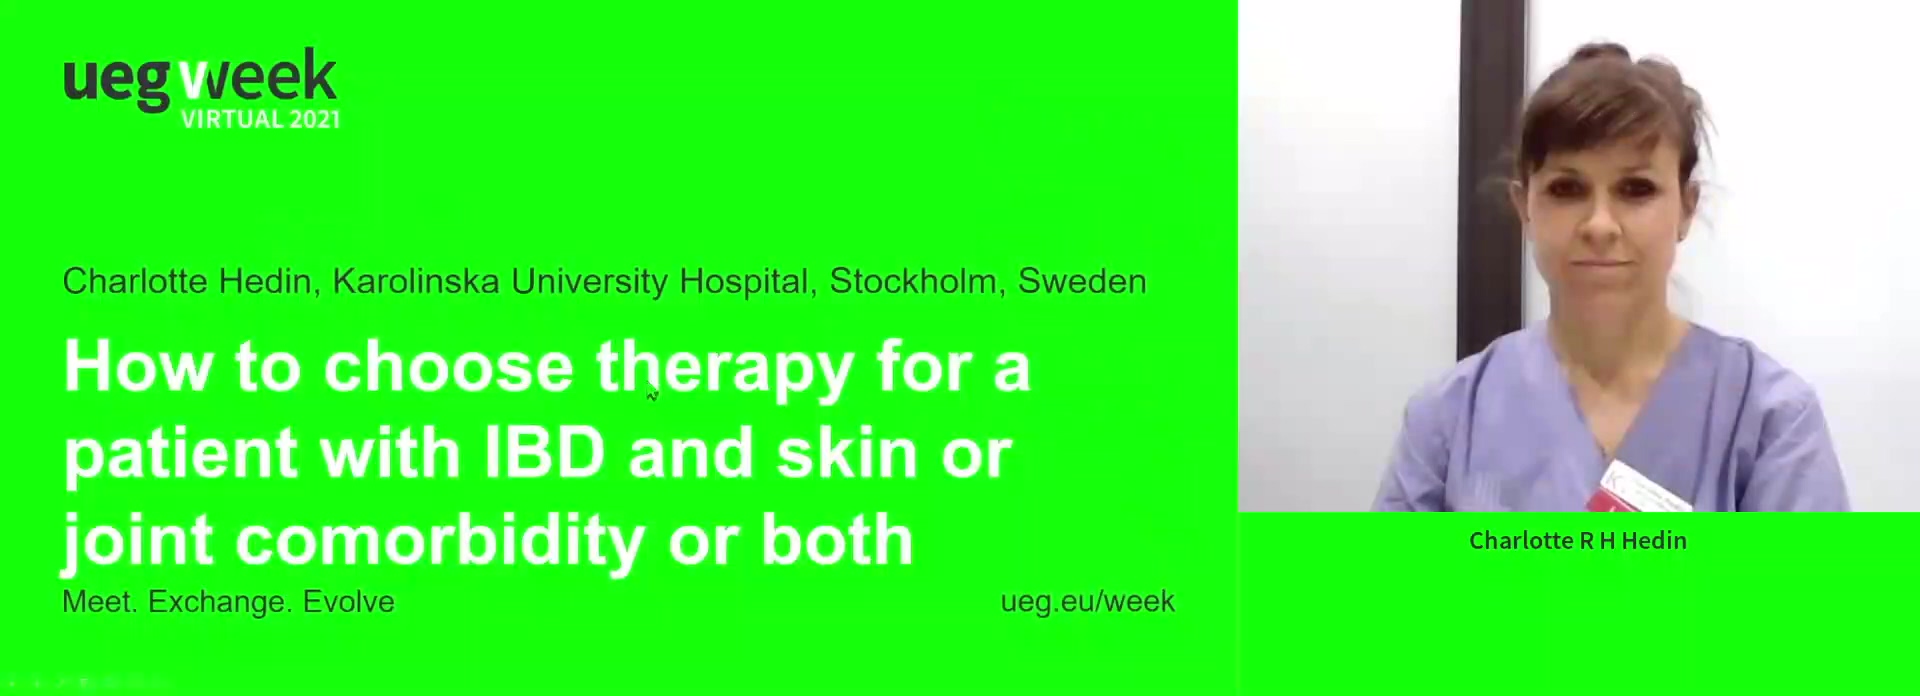 How to choose therapy for a patient with IBD and skin or joint comorbidity or both